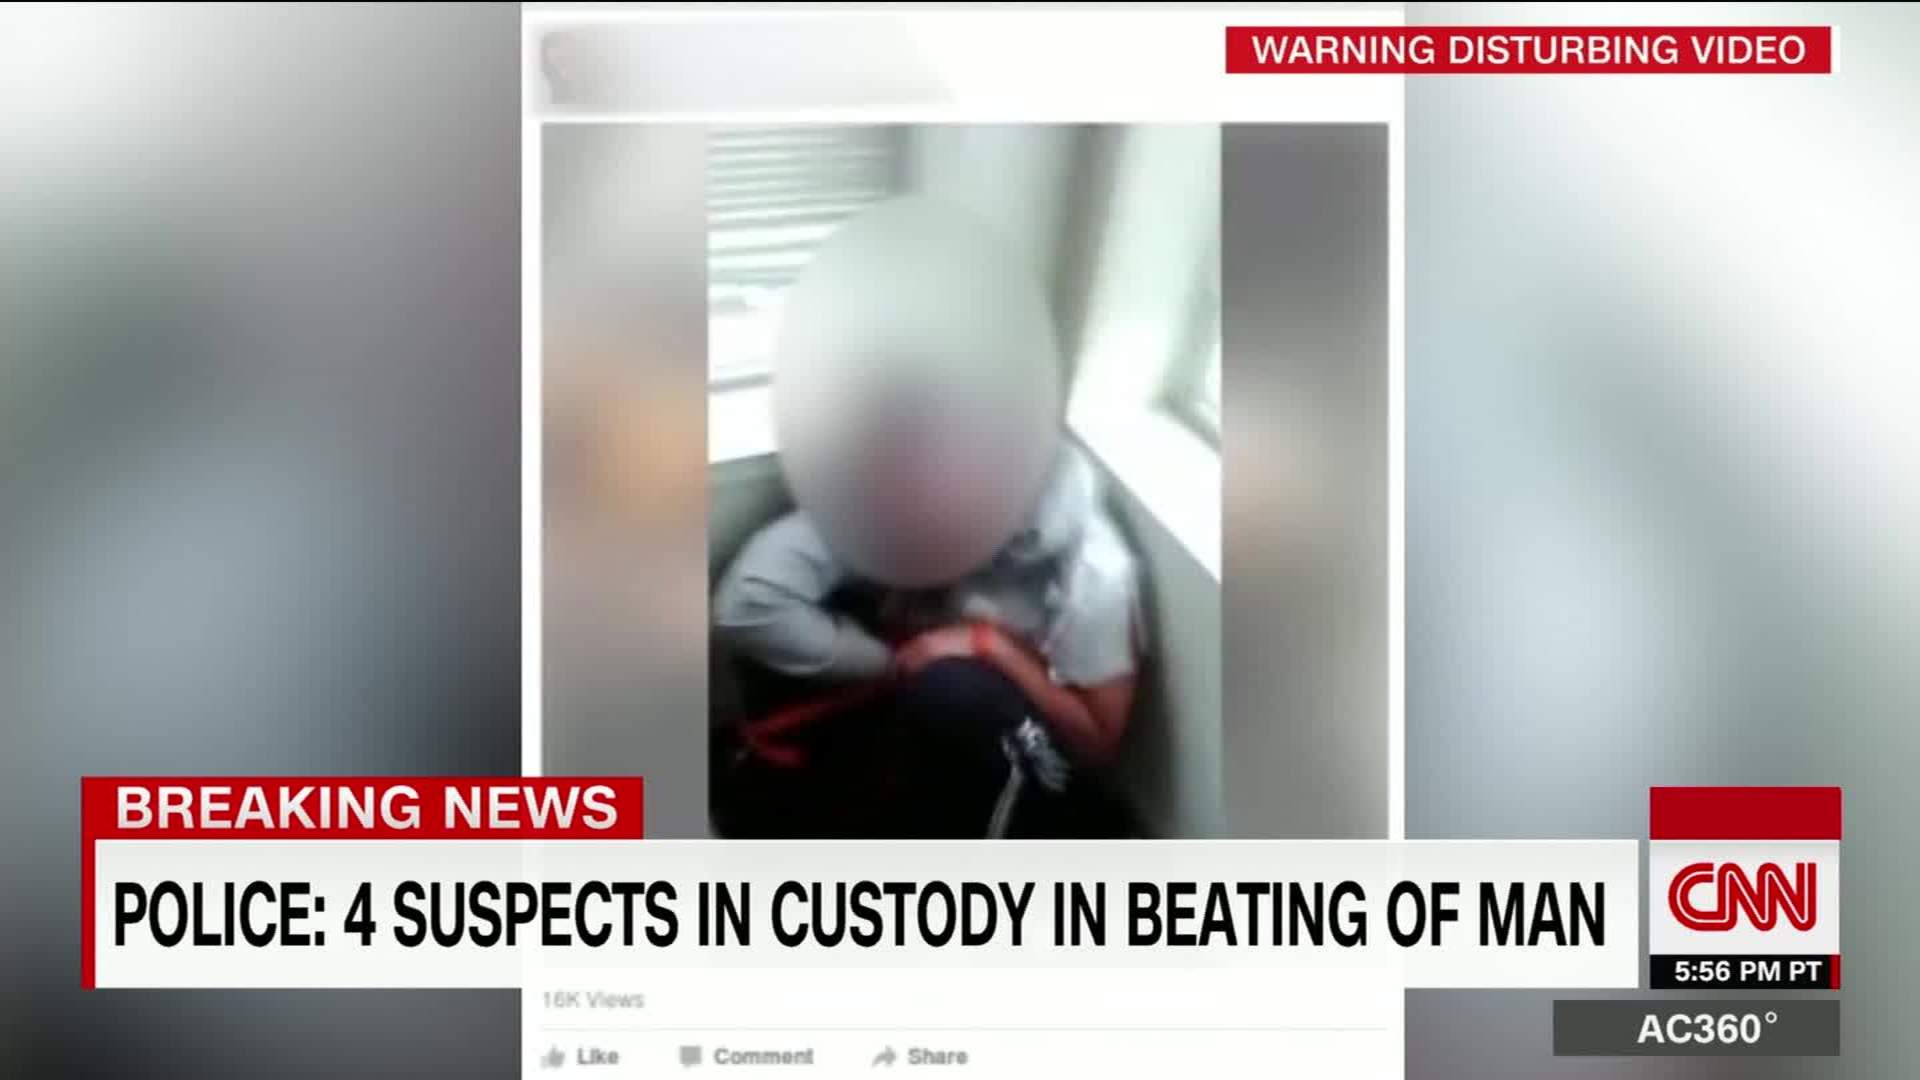 Chicago torture video: 4 charged with hate crimes, kidnapping | CNN